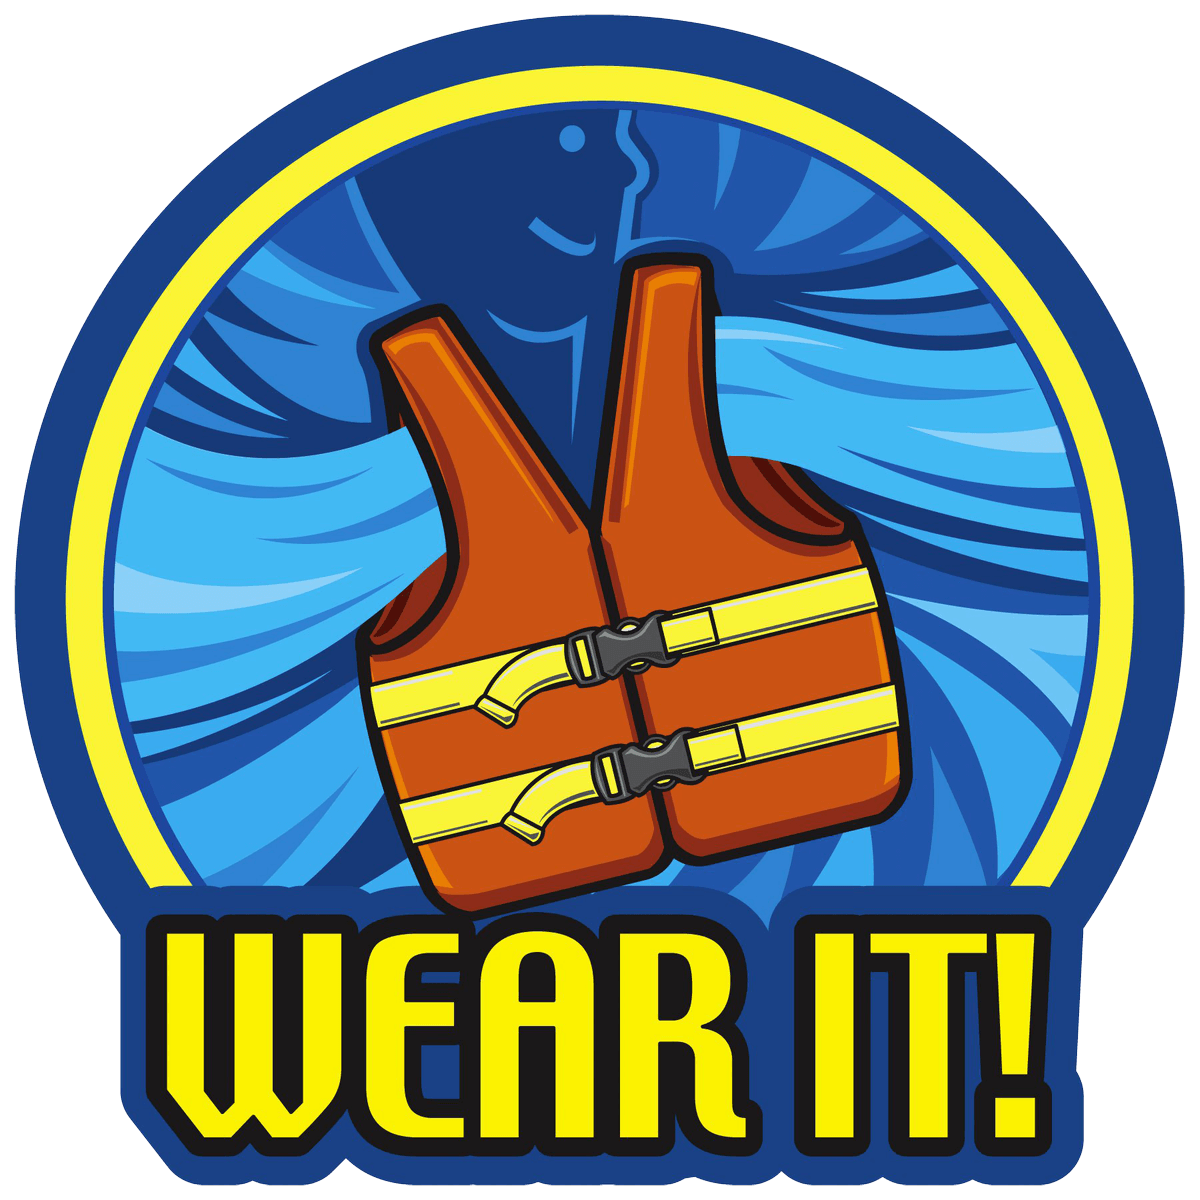 Wear your life jacket